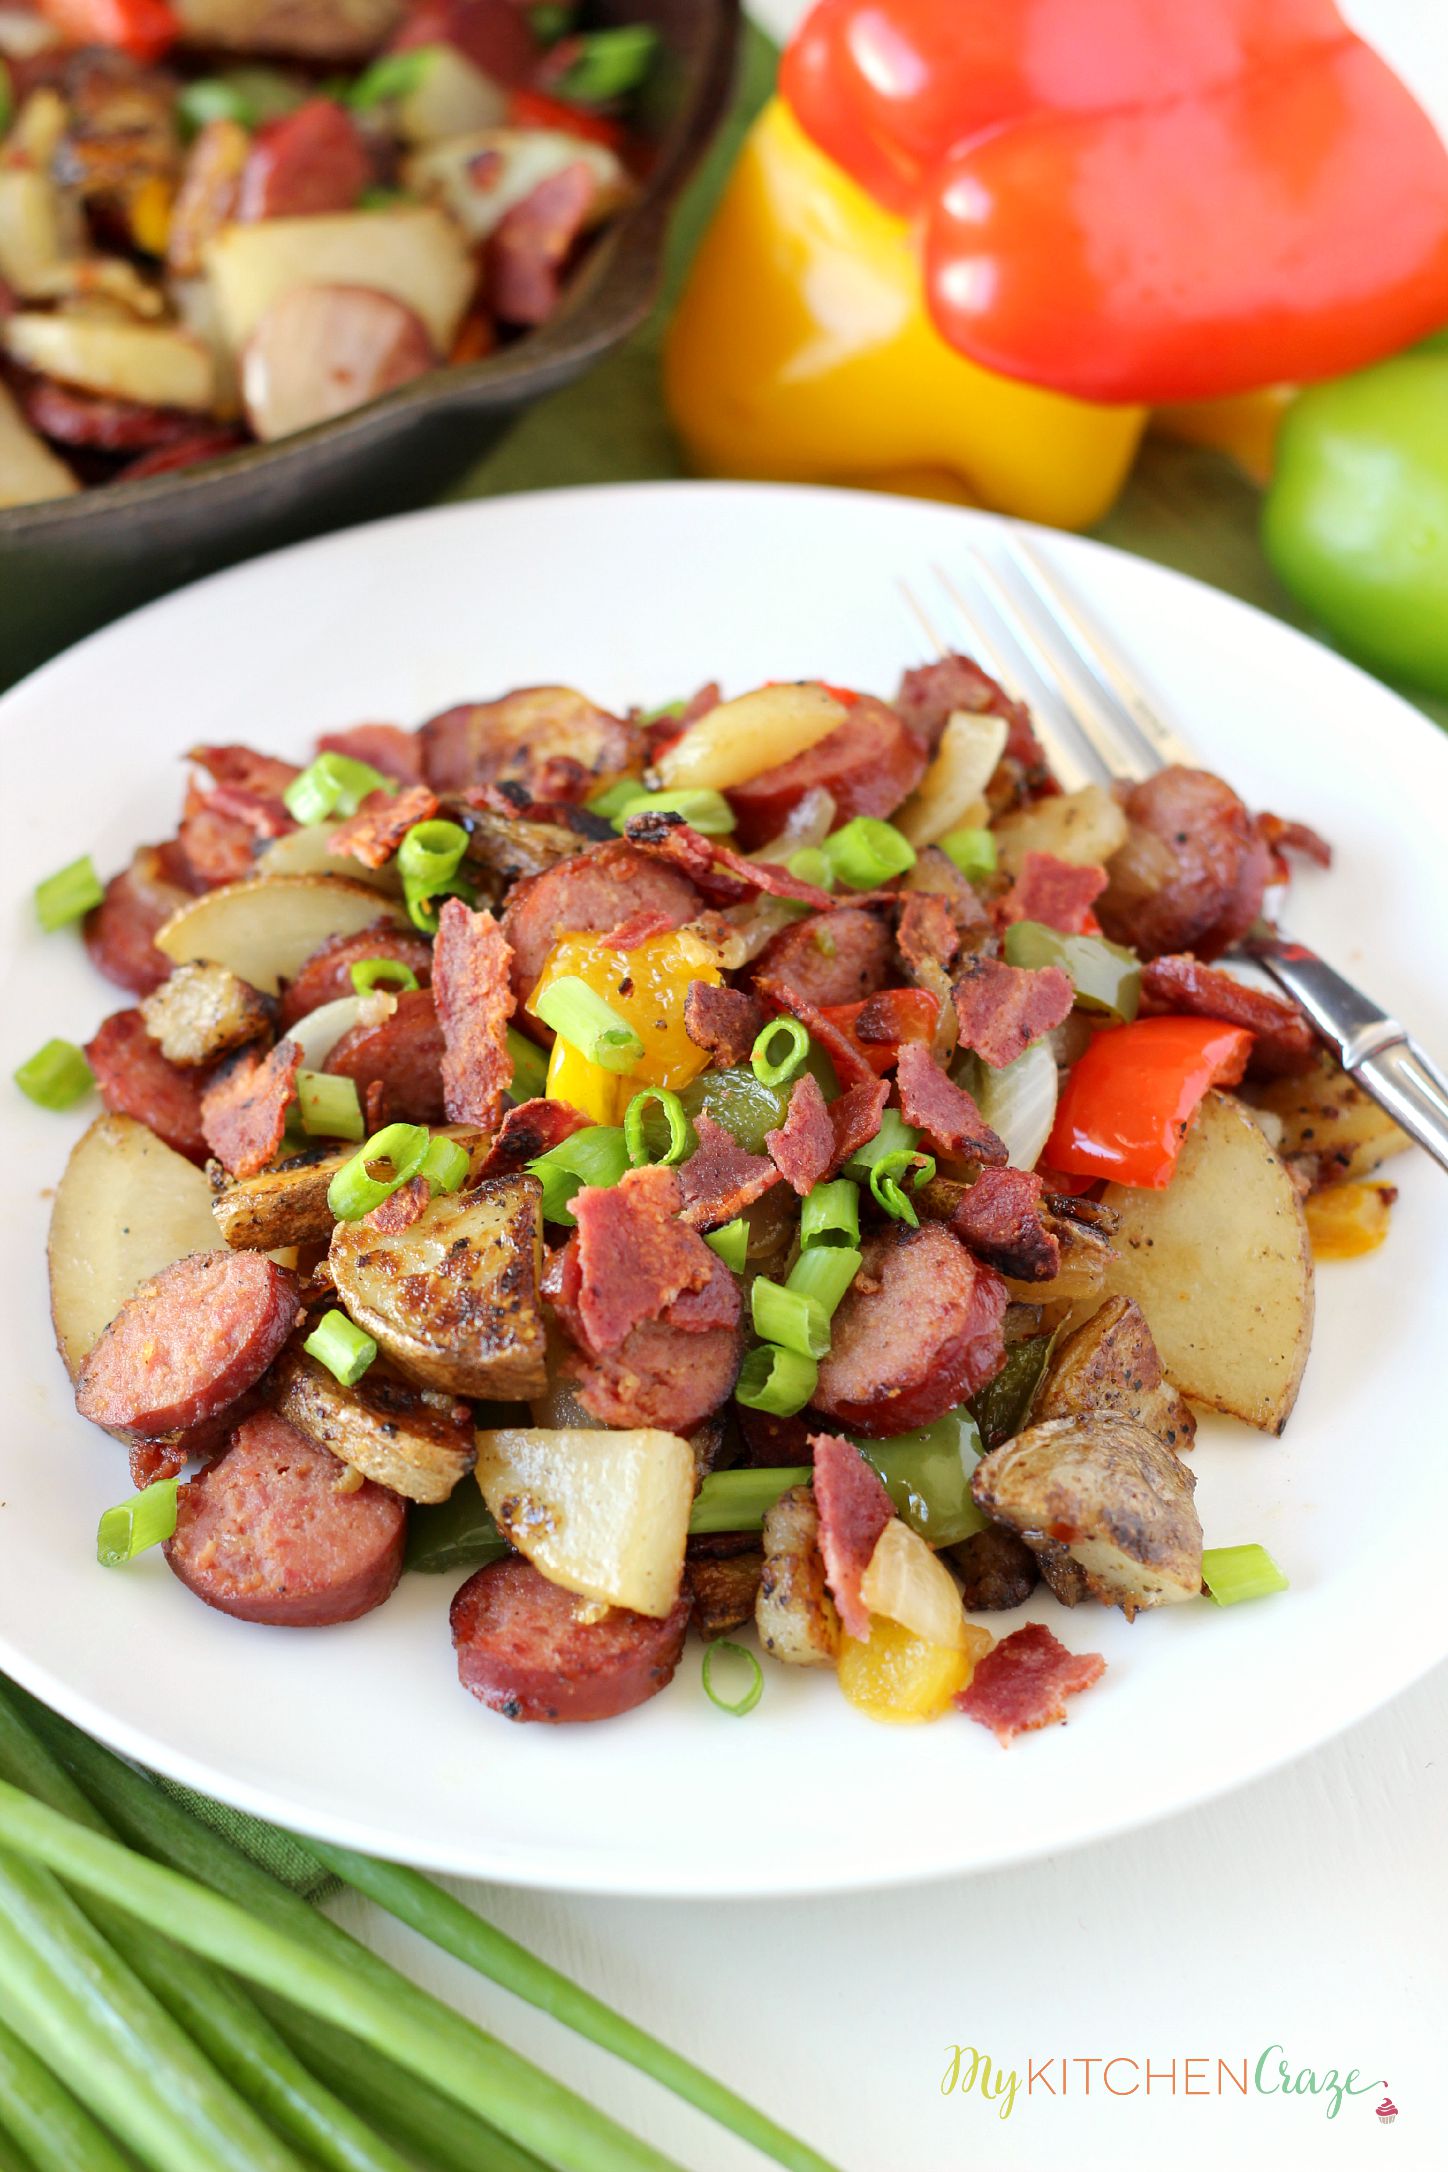 Beef Kielbasa & Potato Skillet ~ mykitchencraze.com ~ Beef Kielbasa and Potato Skillet is a hearty delicious meal. On your table within 30 minutes and only uses one skillet, this dish makes cooking and cleaning a breeze.